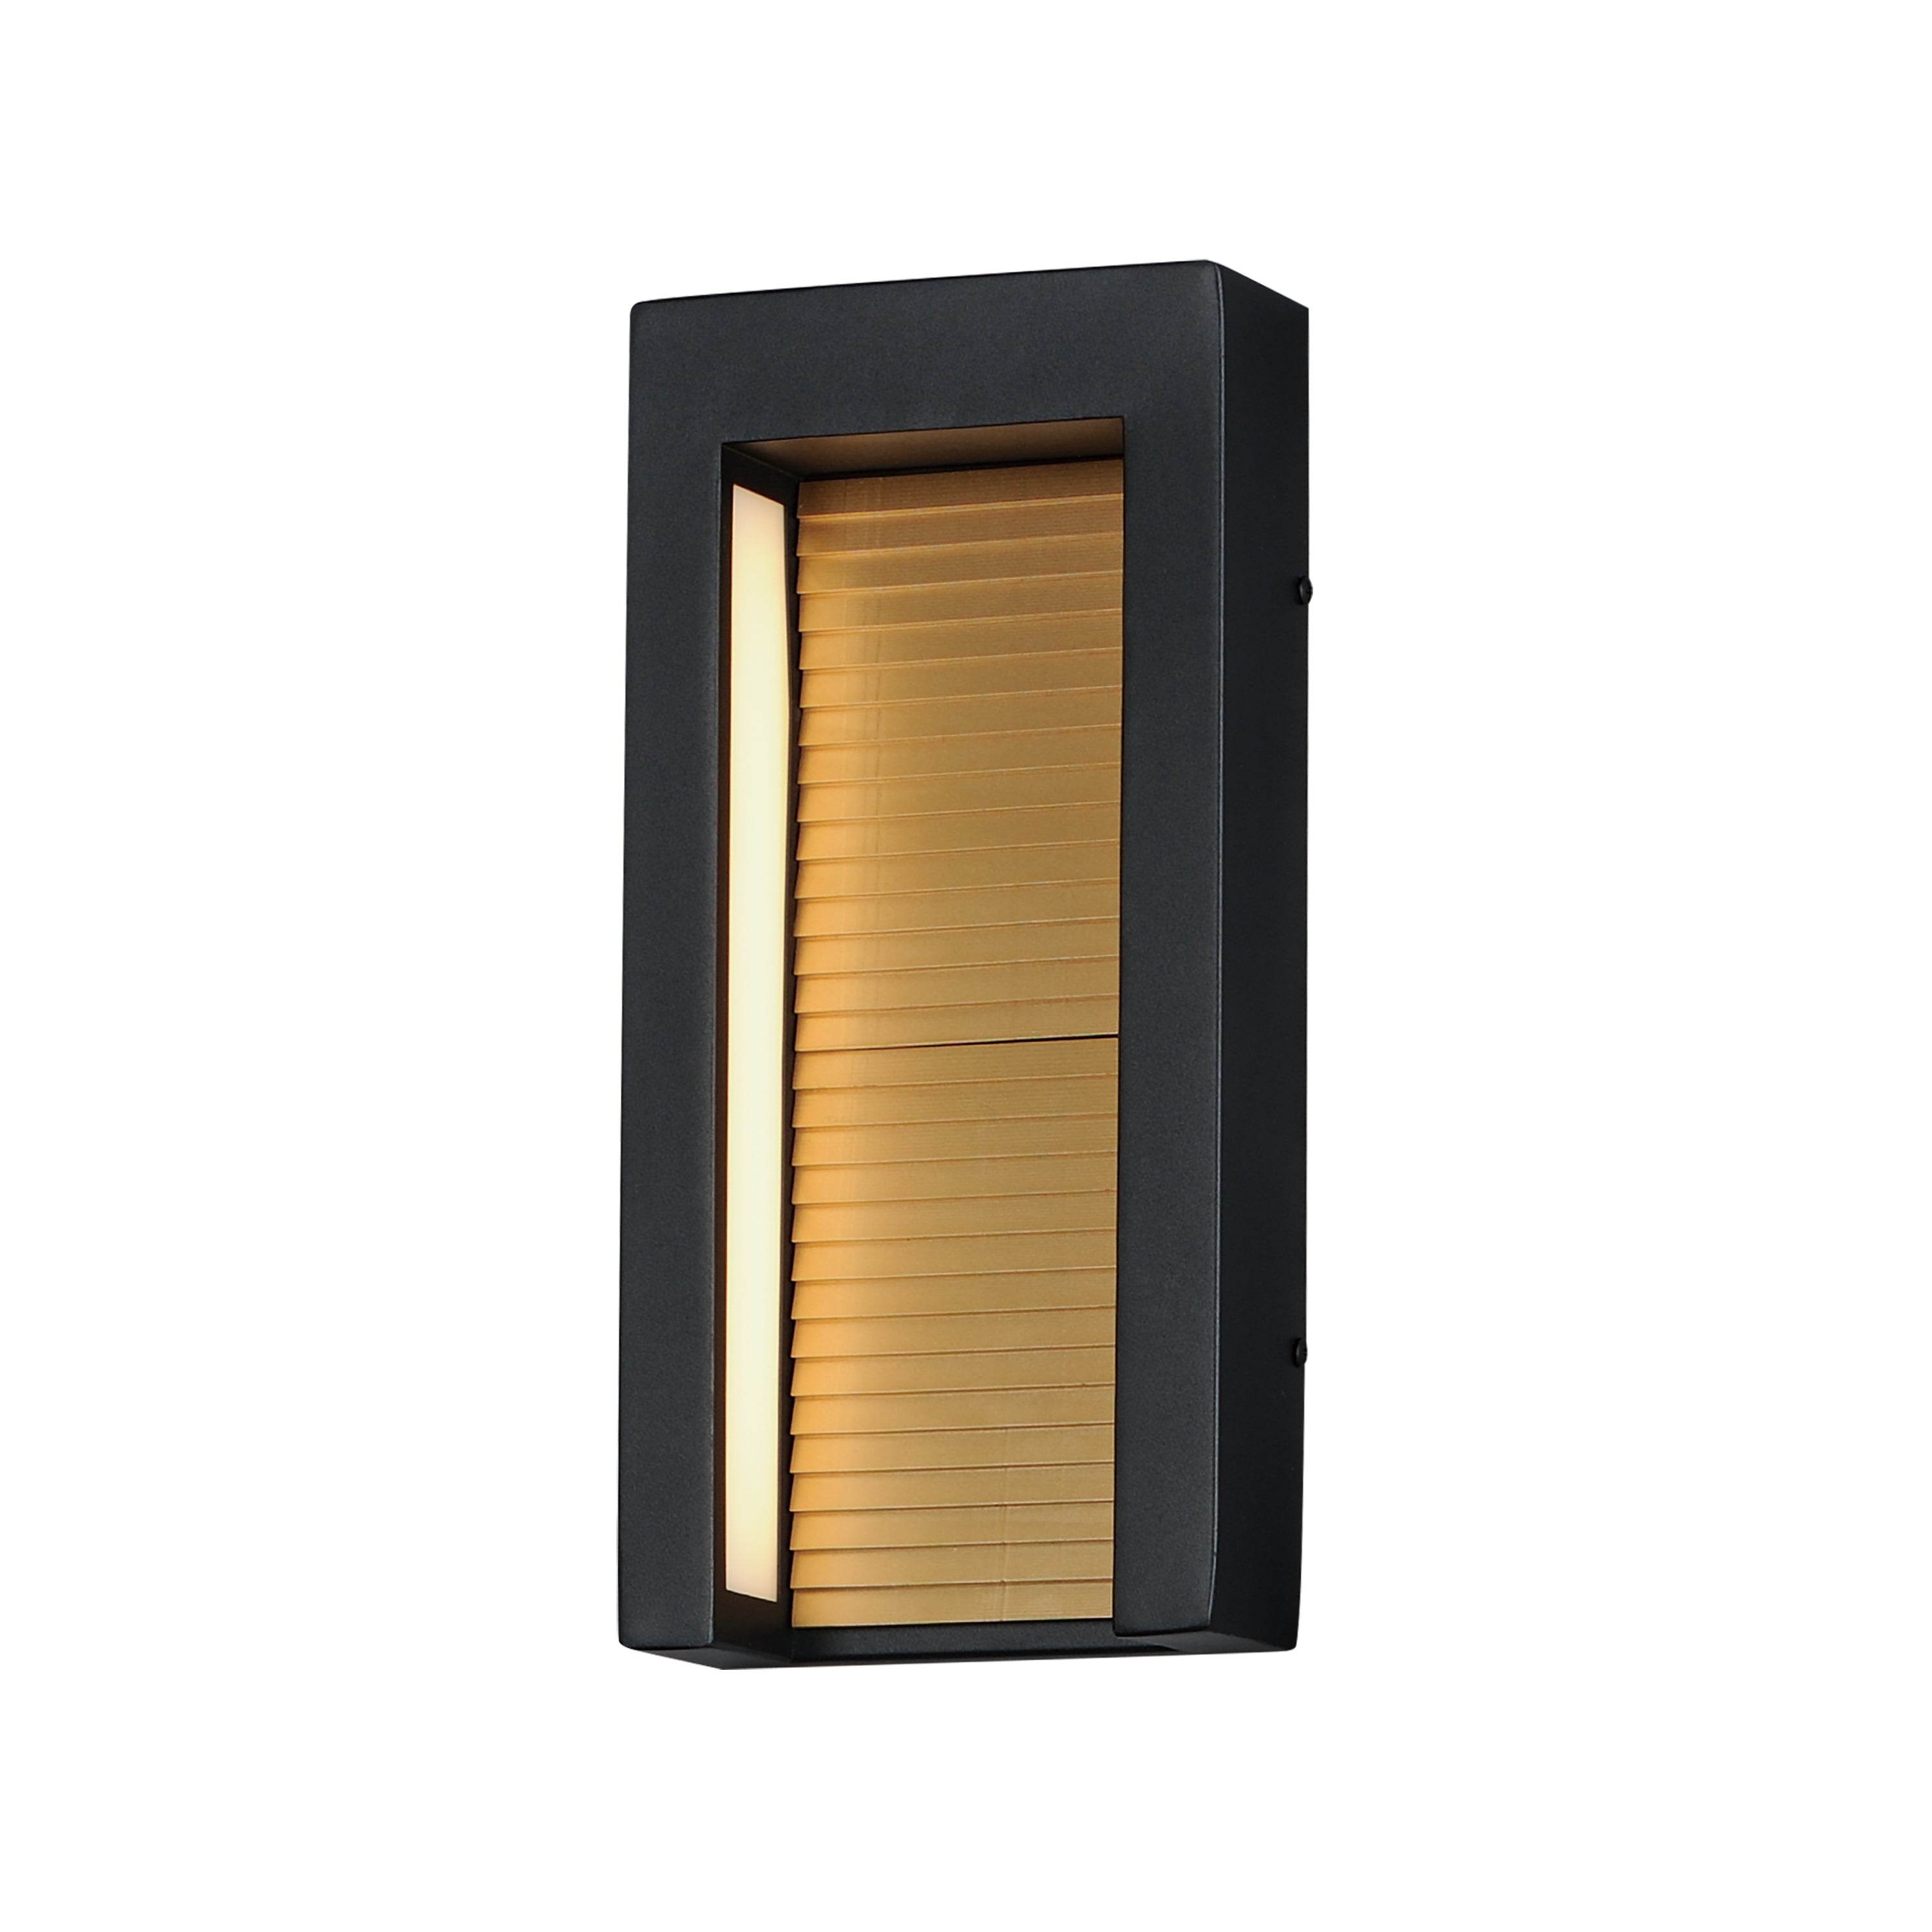 Alcove-Outdoor Wall Mount Outdoor l Wall ET2 x6.5x14 Black / Gold 